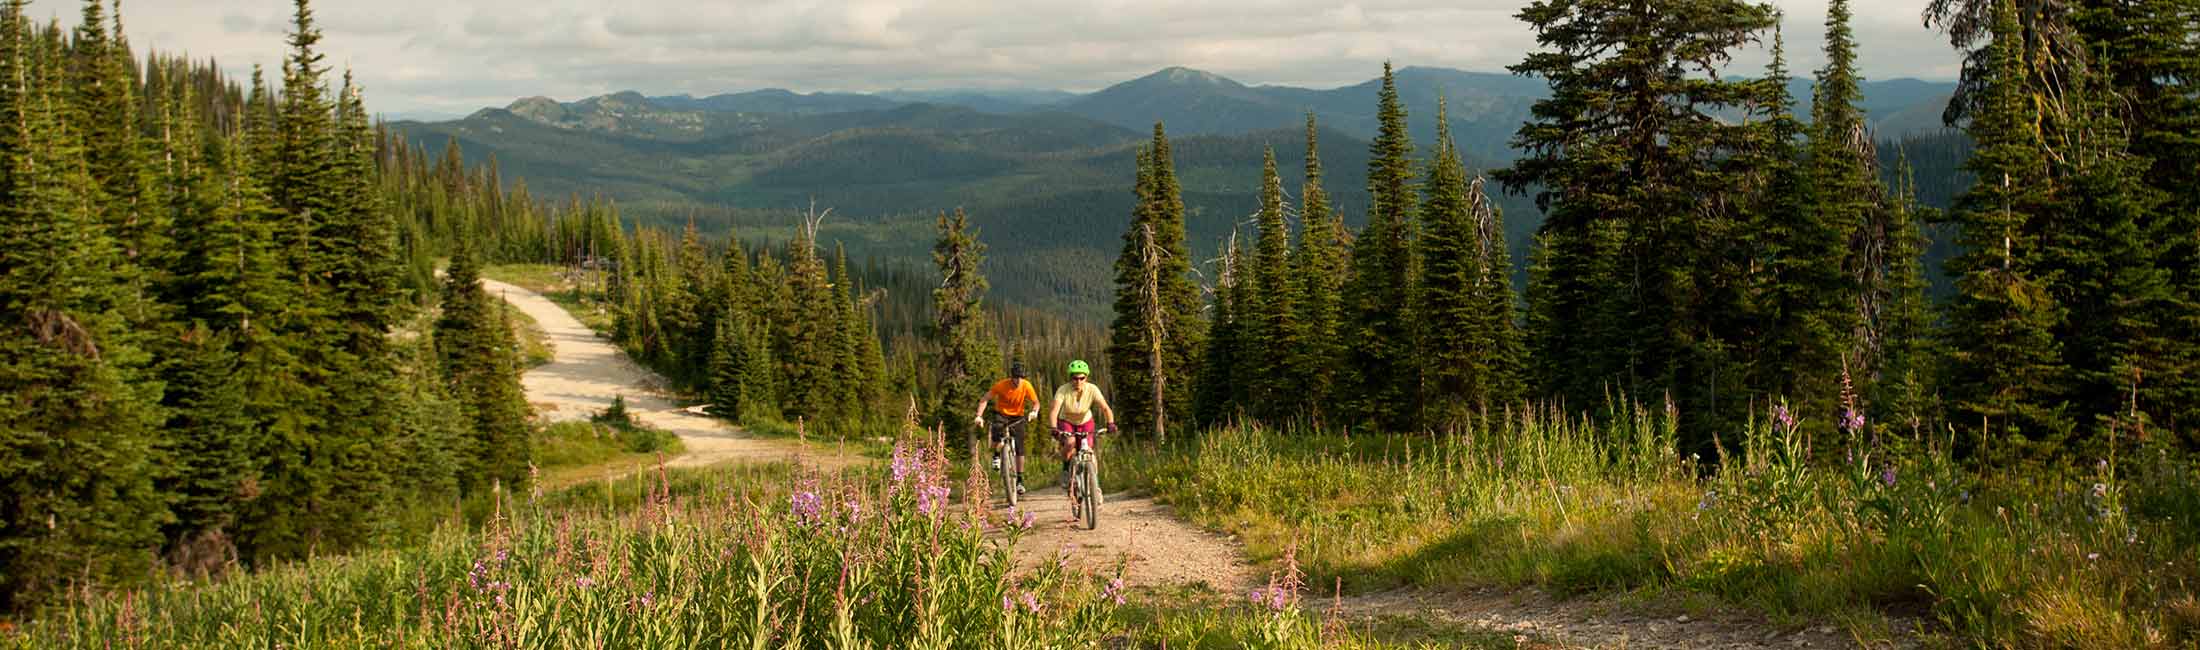 Fall is a great time to hike and bike the trails of Western Montana.